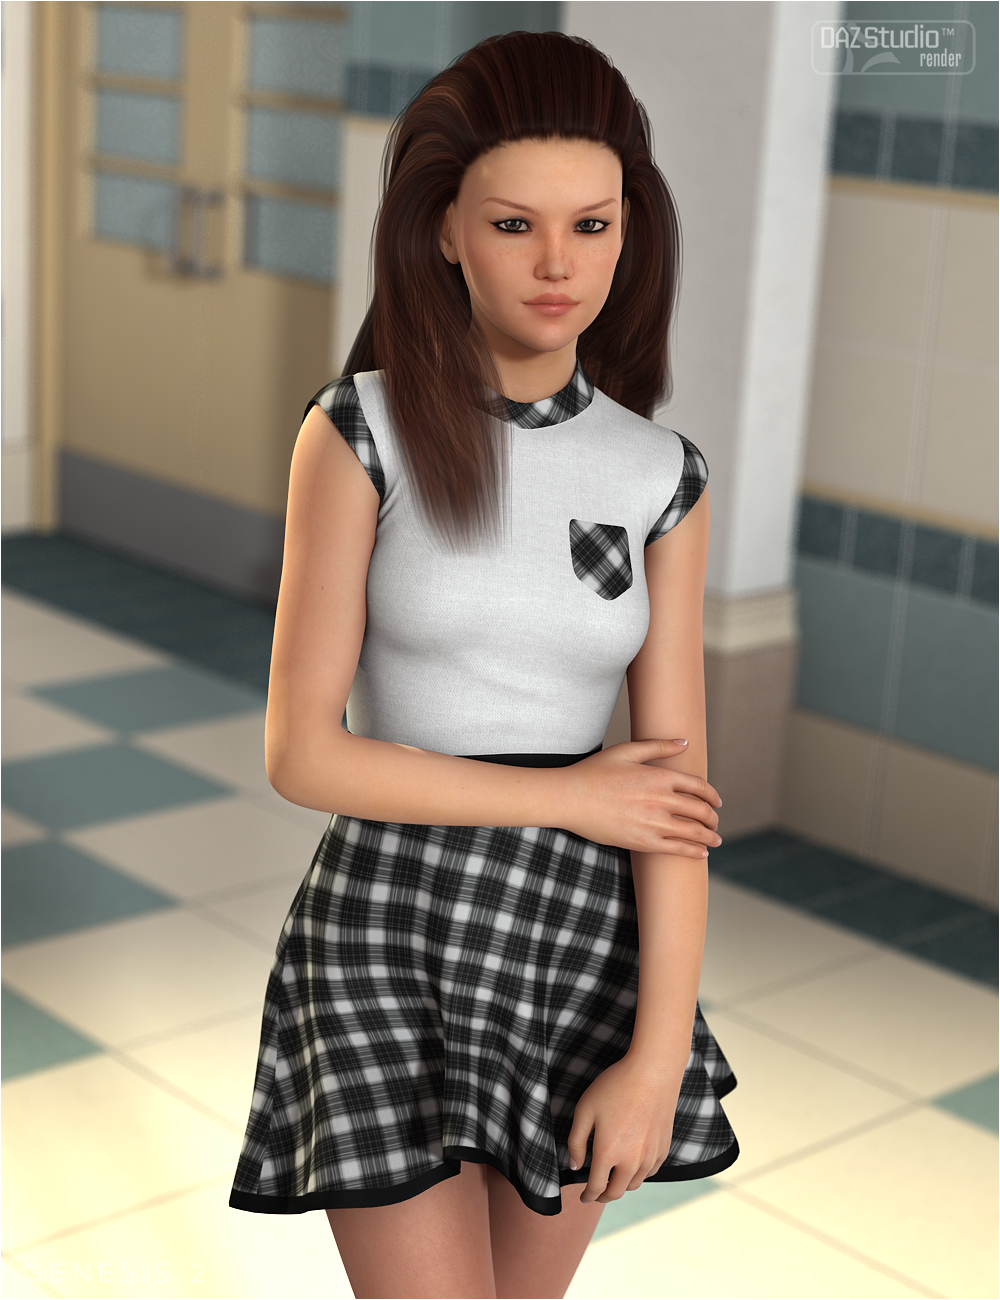 School Textures for Skater Dress by: OziChick, 3D Models by Daz 3D